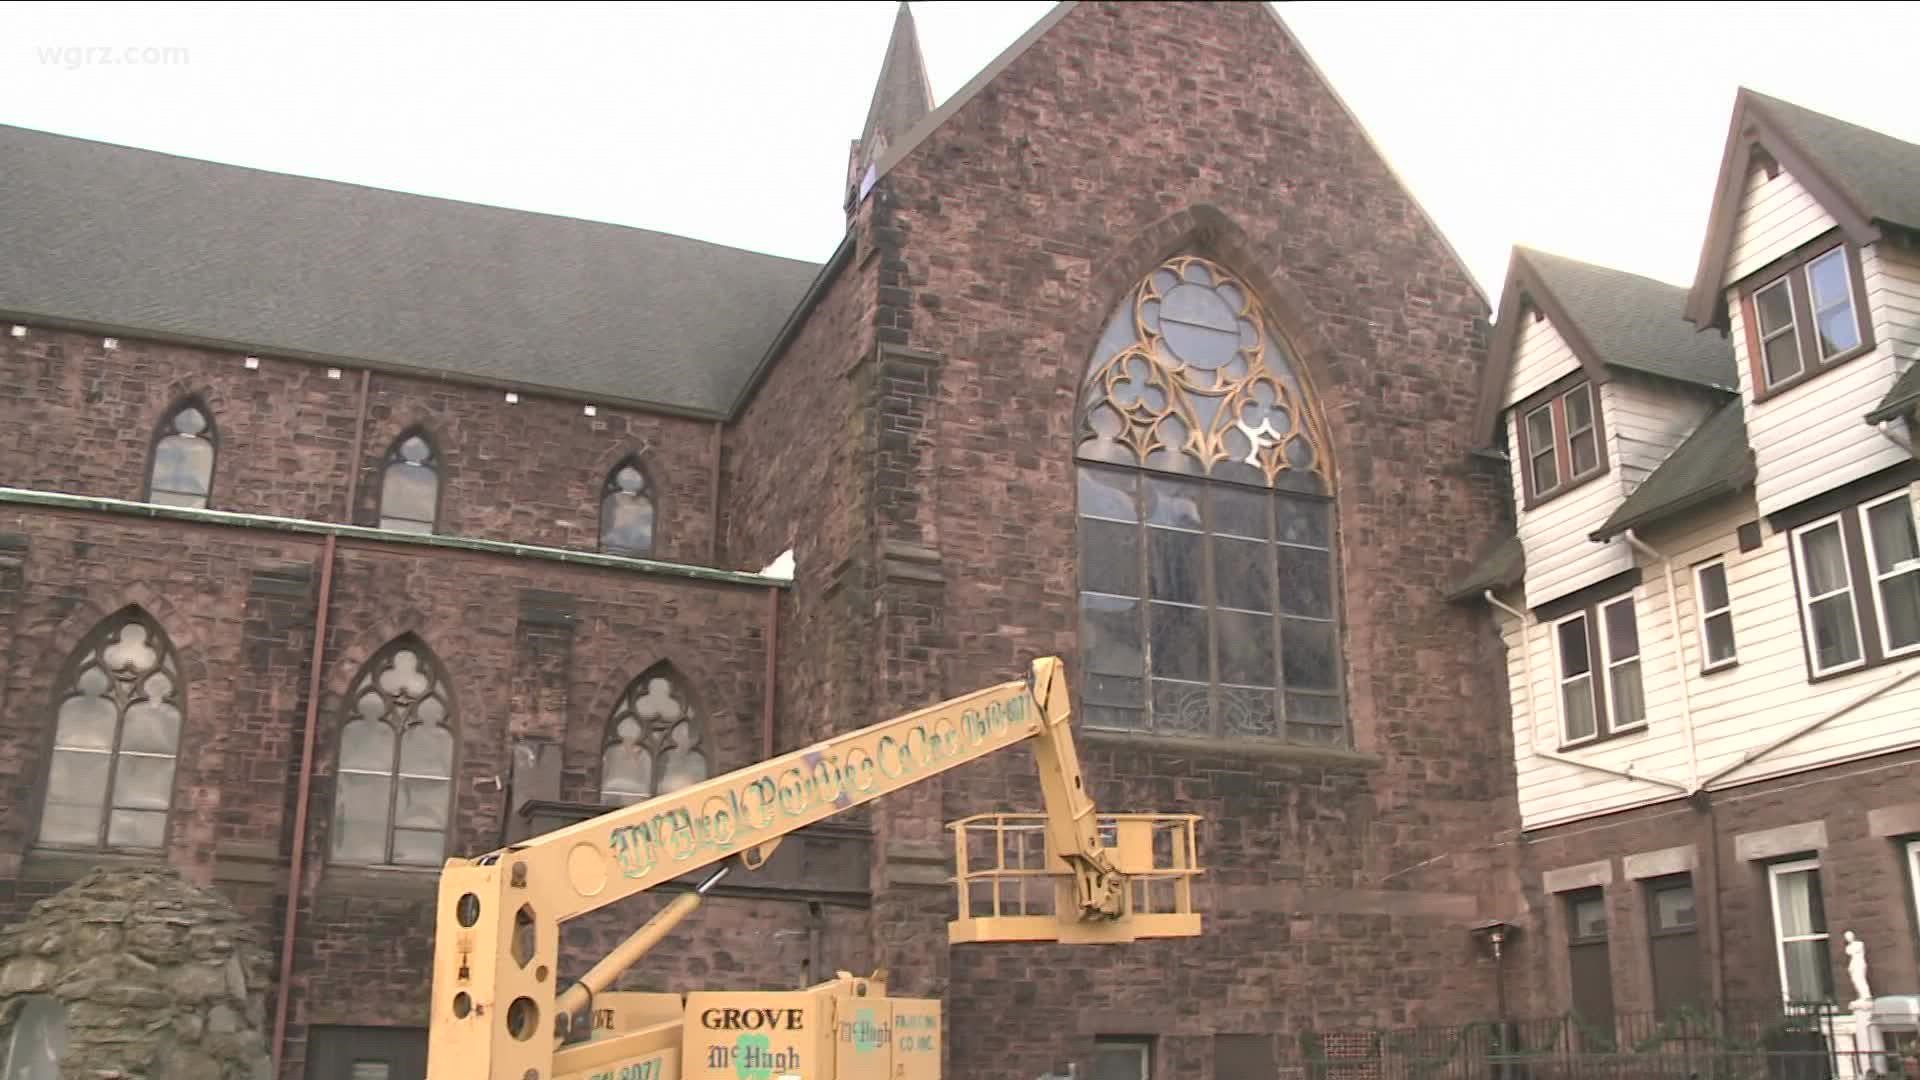 There is an effort underway to restore stained glass windows at Our Lady of Perpetual Help Church in Buffalo's First Ward.